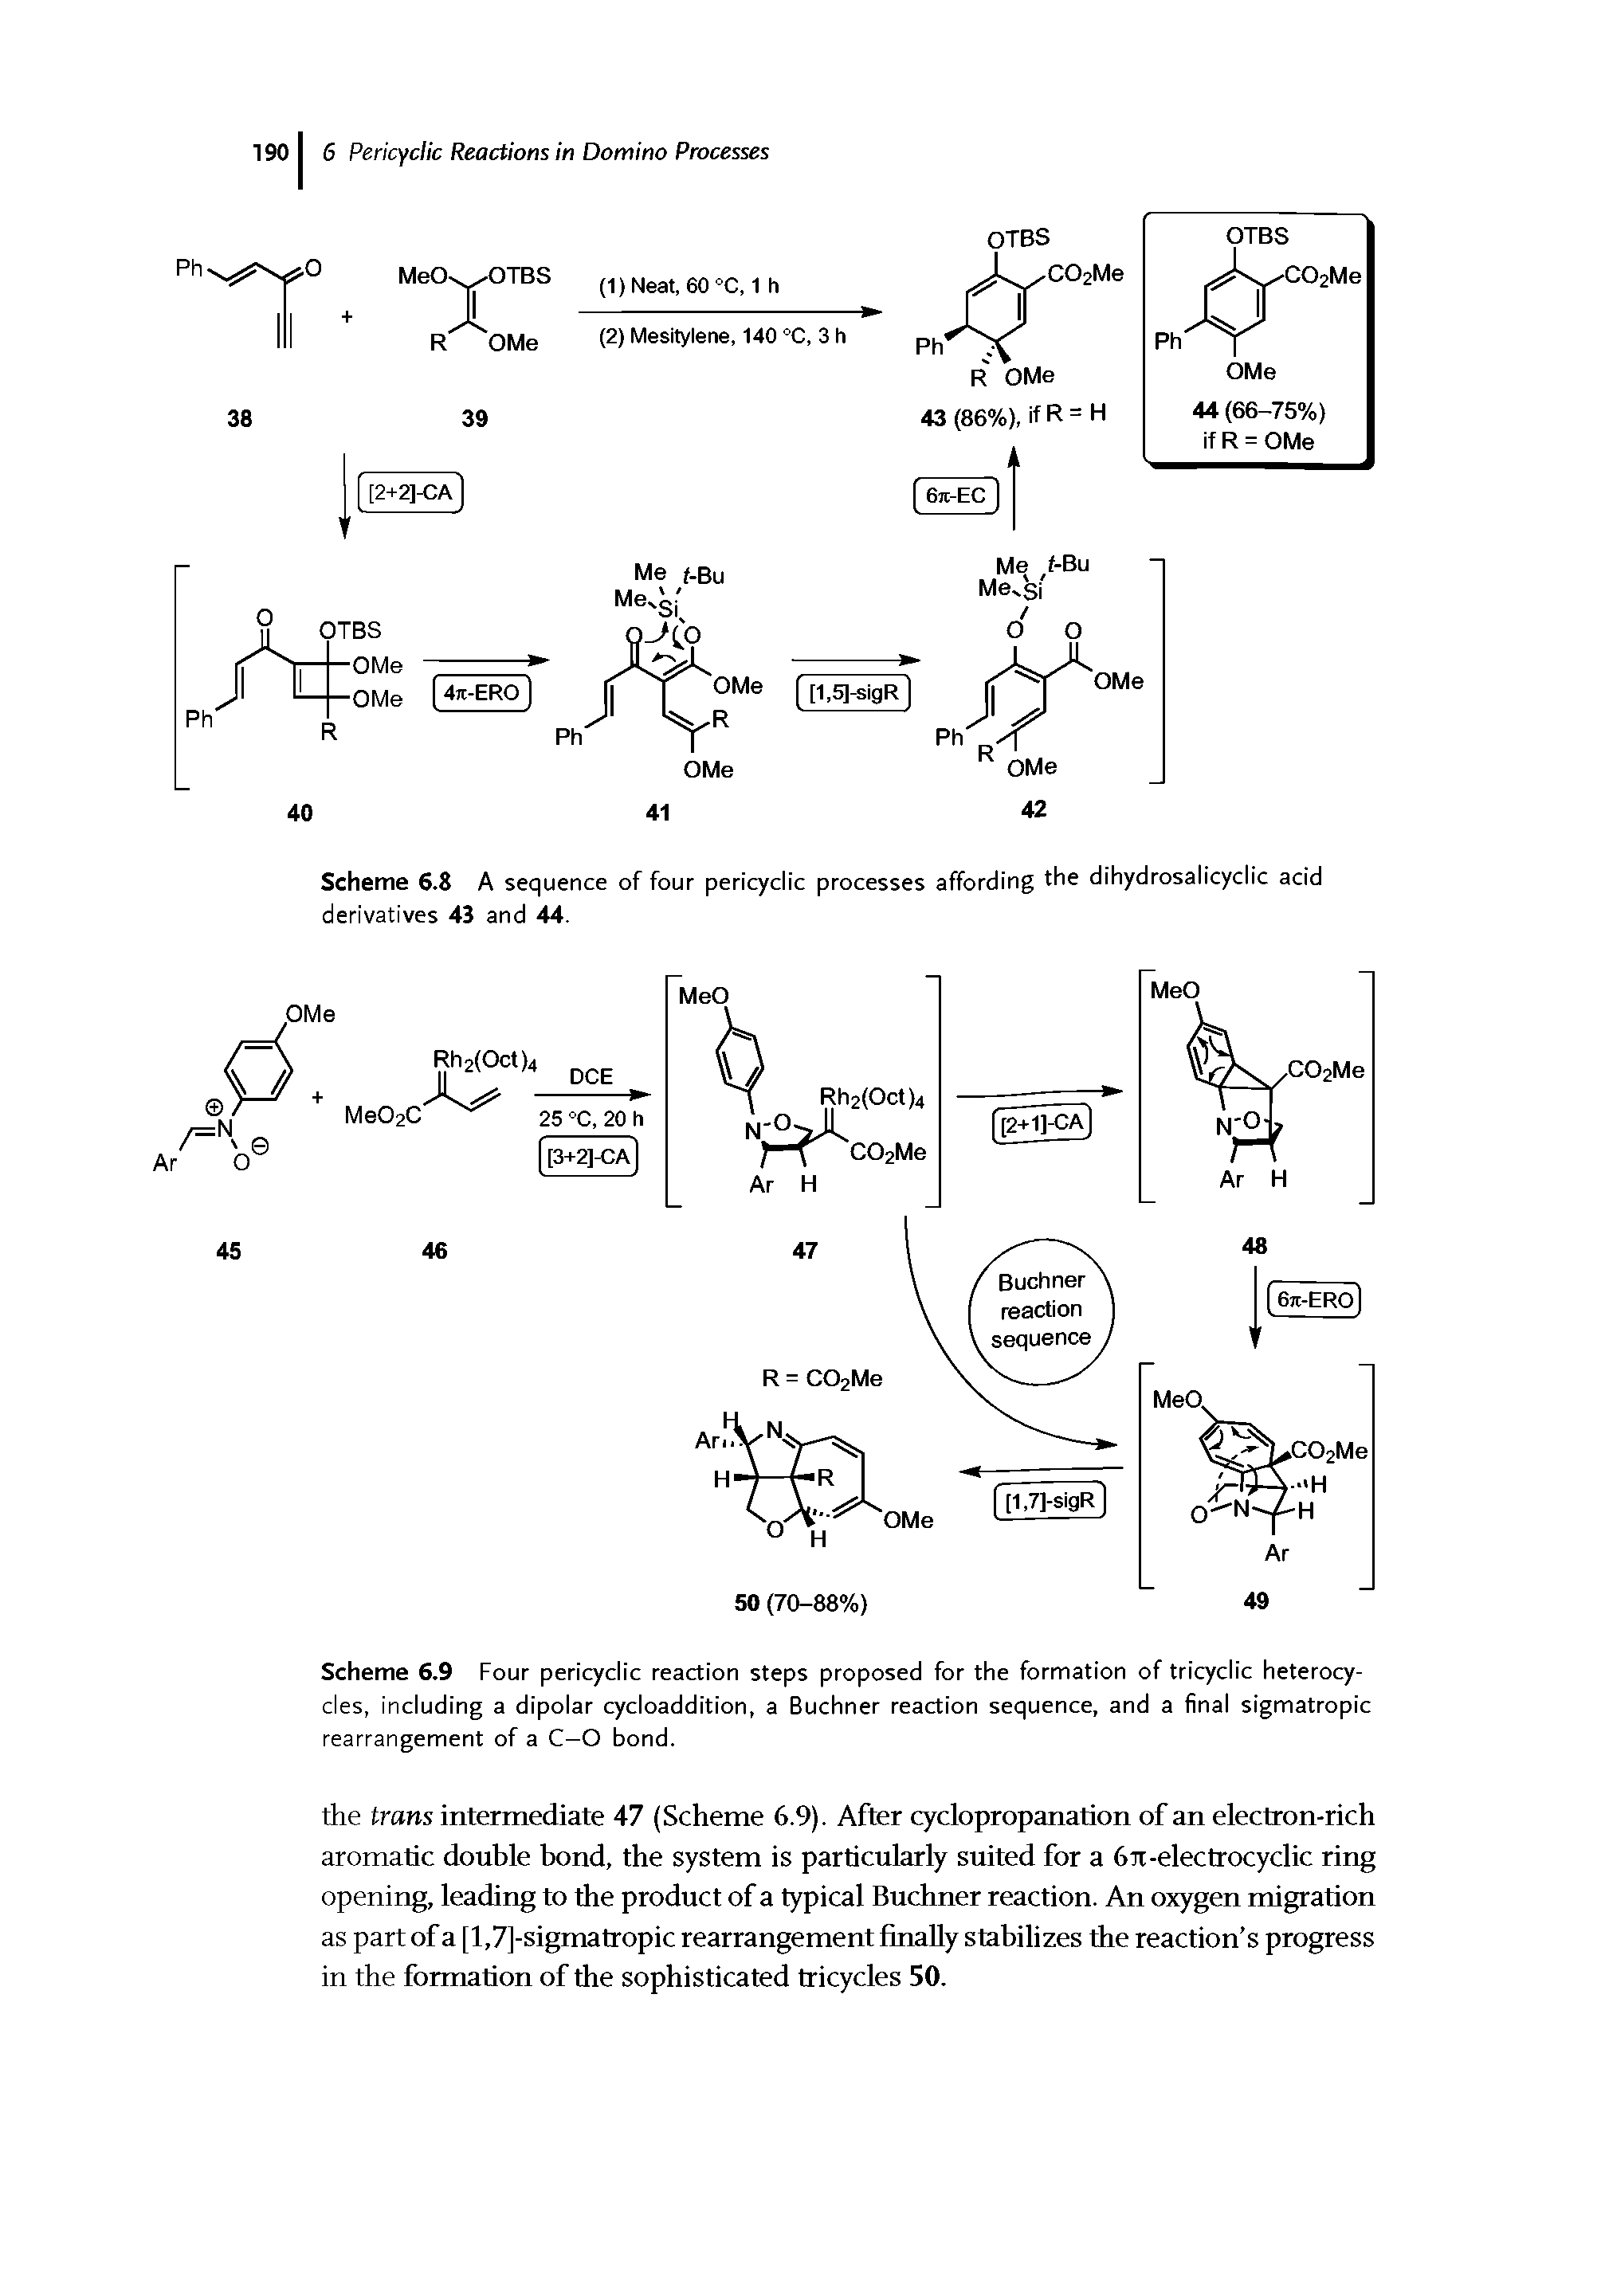 Scheme 6.9 Four pericyclic reaction steps proposed for the formation of tricyclic heterocycles, including a dipolar cycloaddition, a Buchner reaction sequence, and a final sigmatropic rearrangement of a C—O bond.